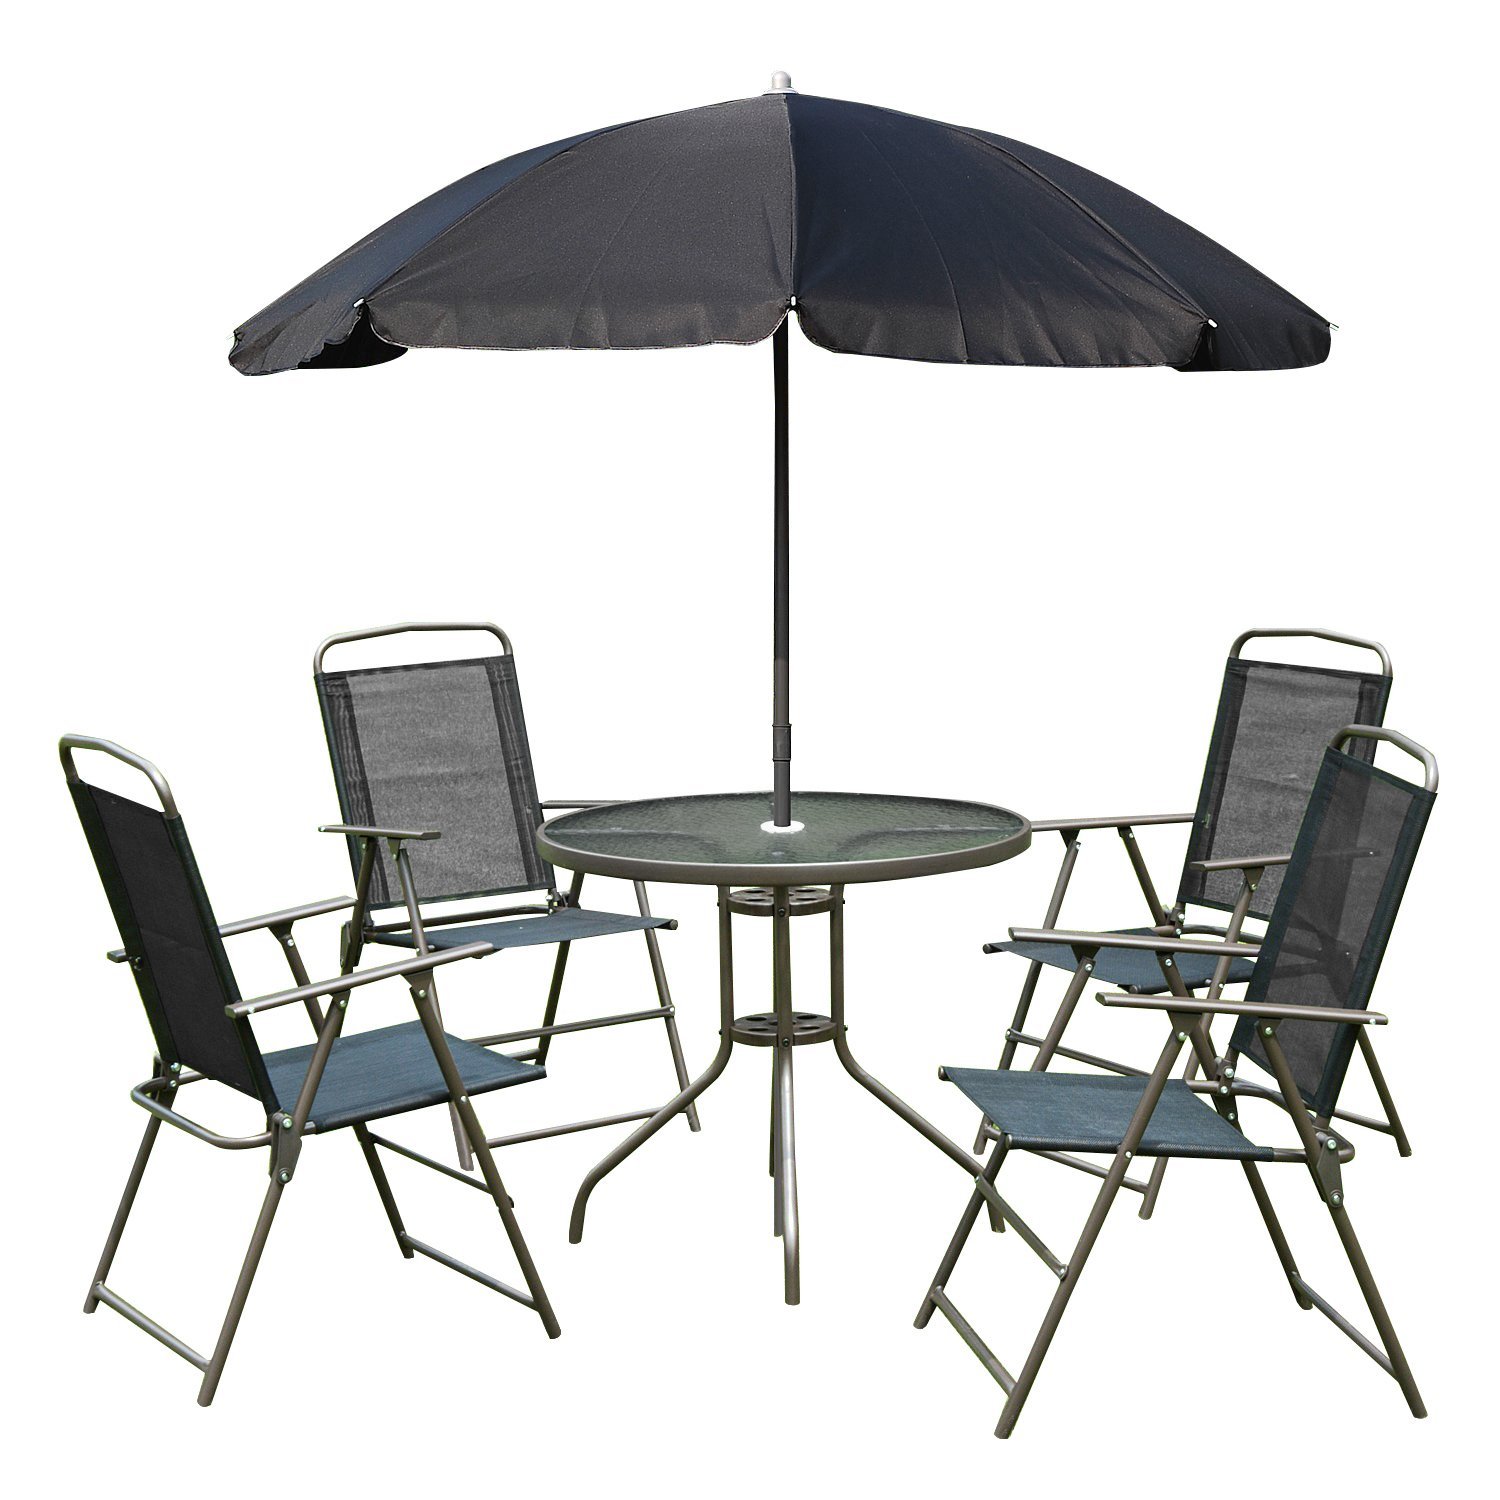 Outsunny 6pc Patio Dining Furniture Set with Included Umbrella, 4 Folding Dining Chairs & a Glass-Top Dinner Table - Black